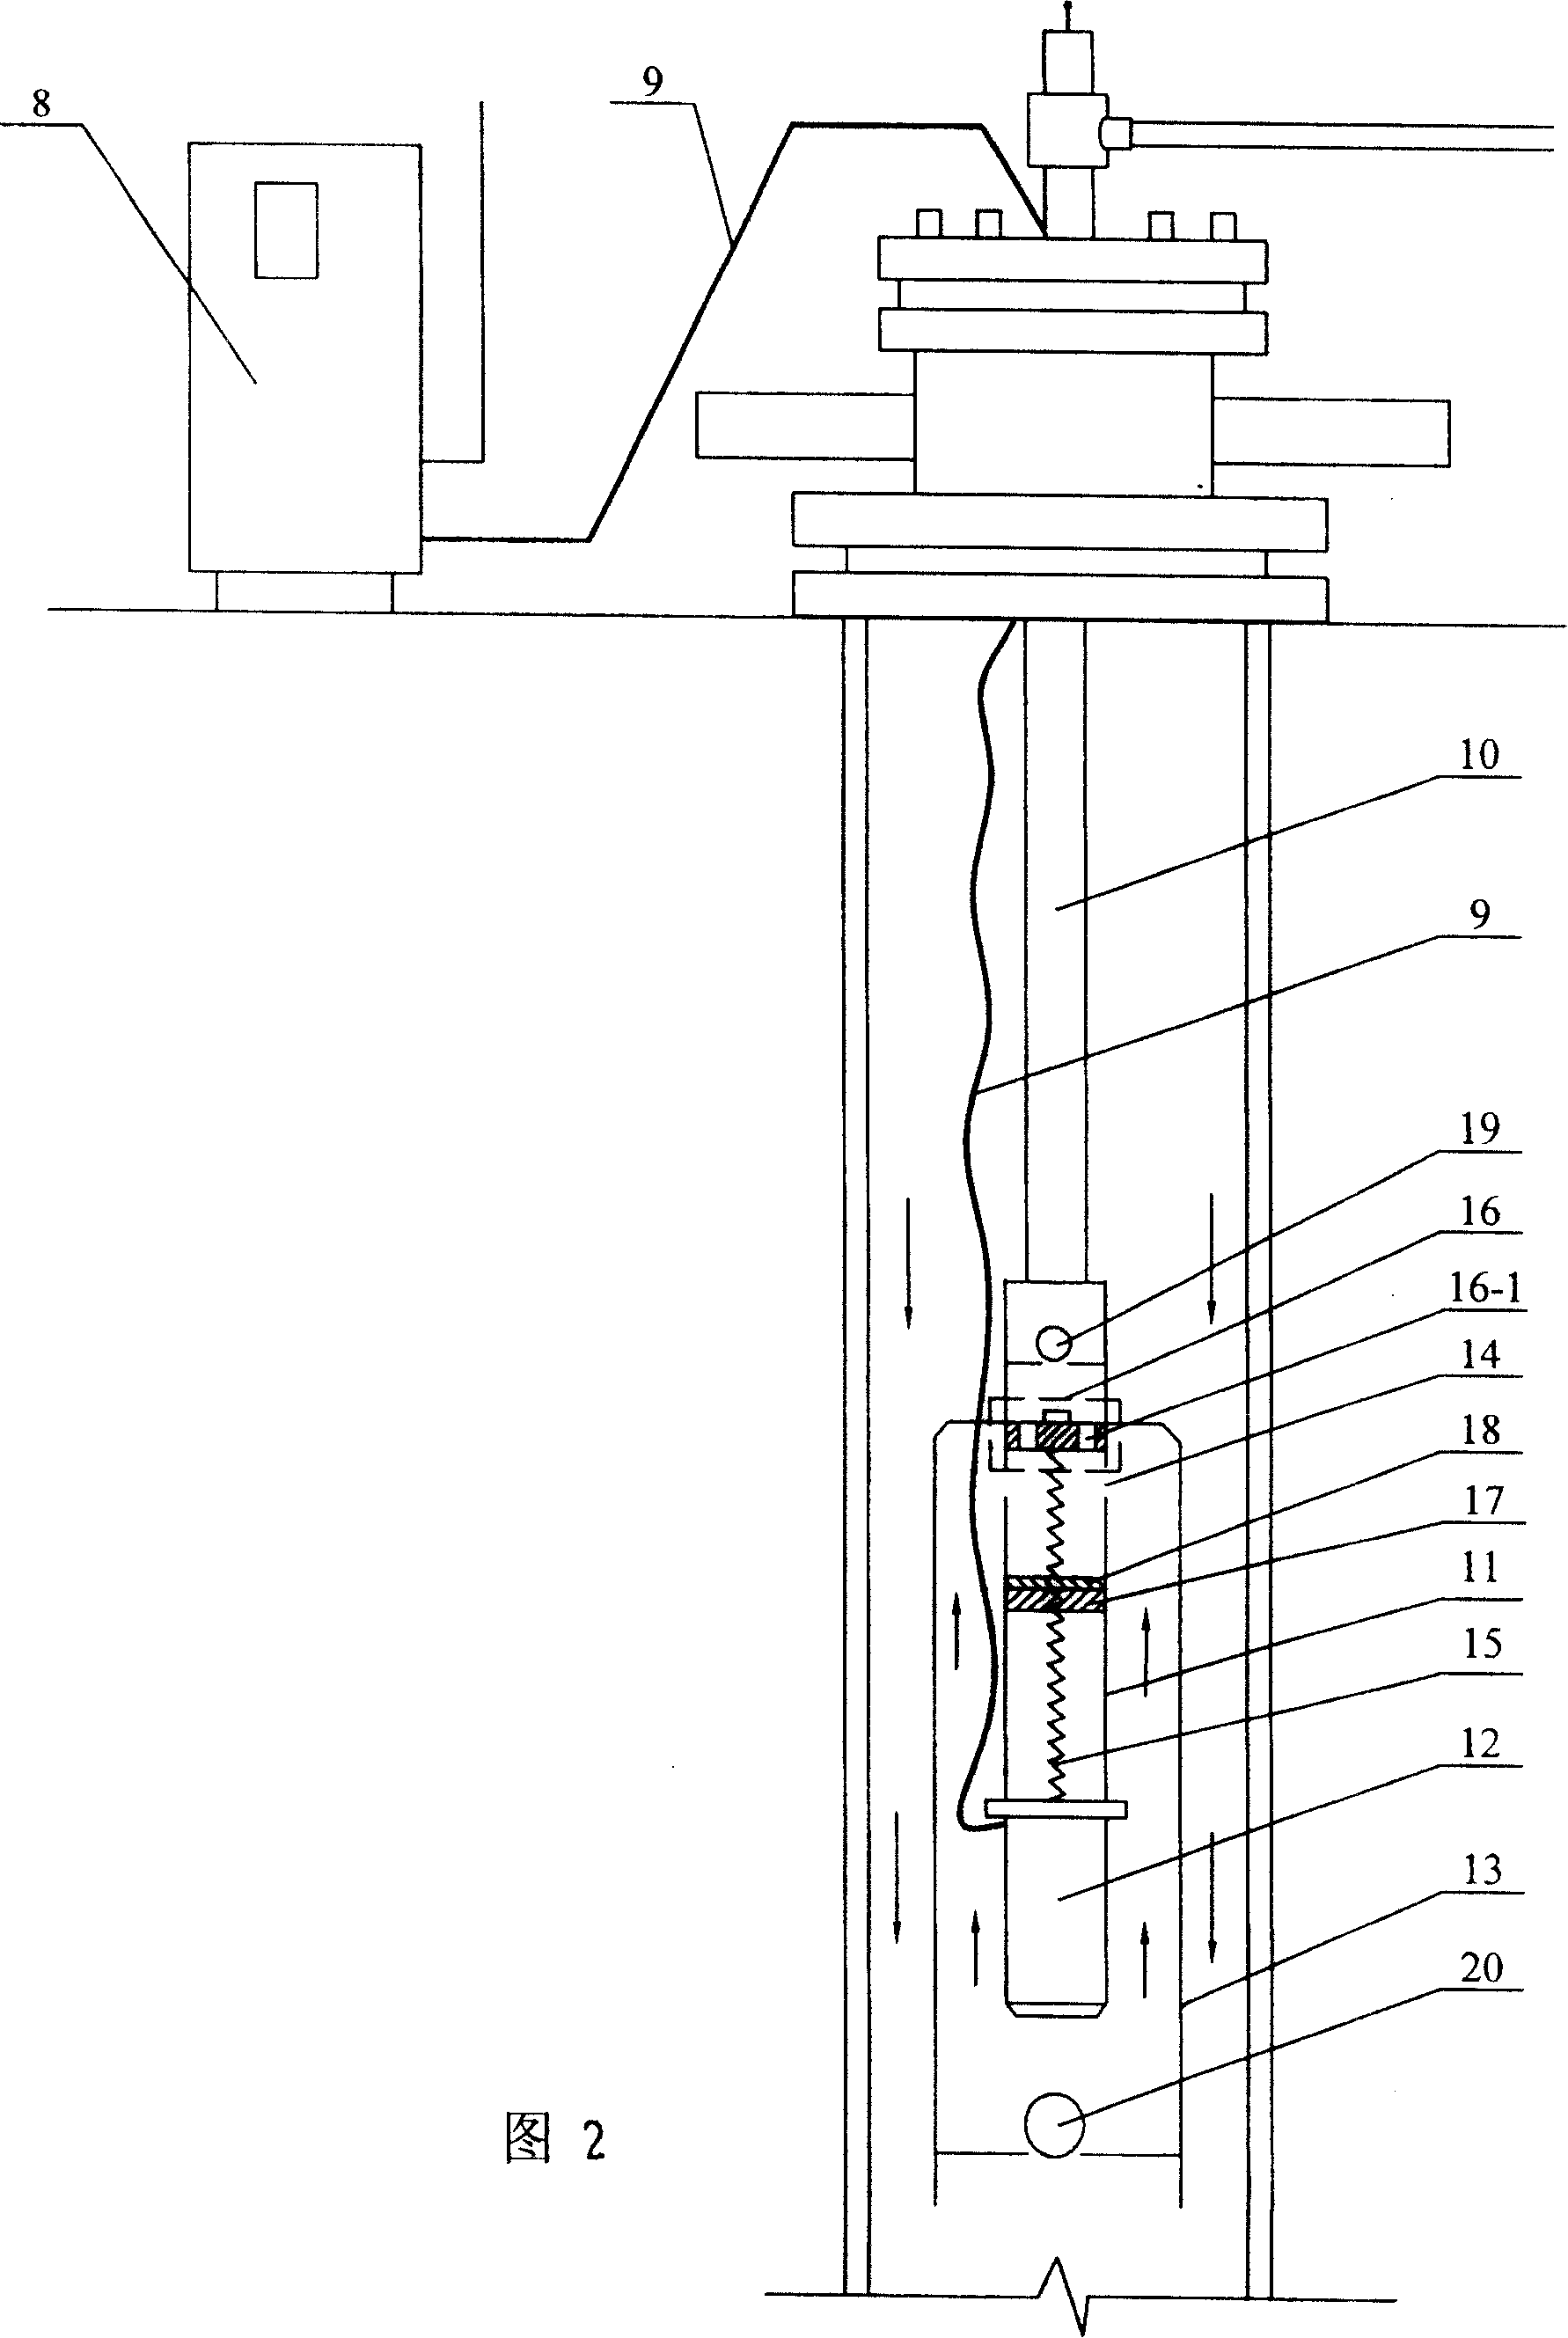 Underground reciprocating oil puming machine driven by rotary motor